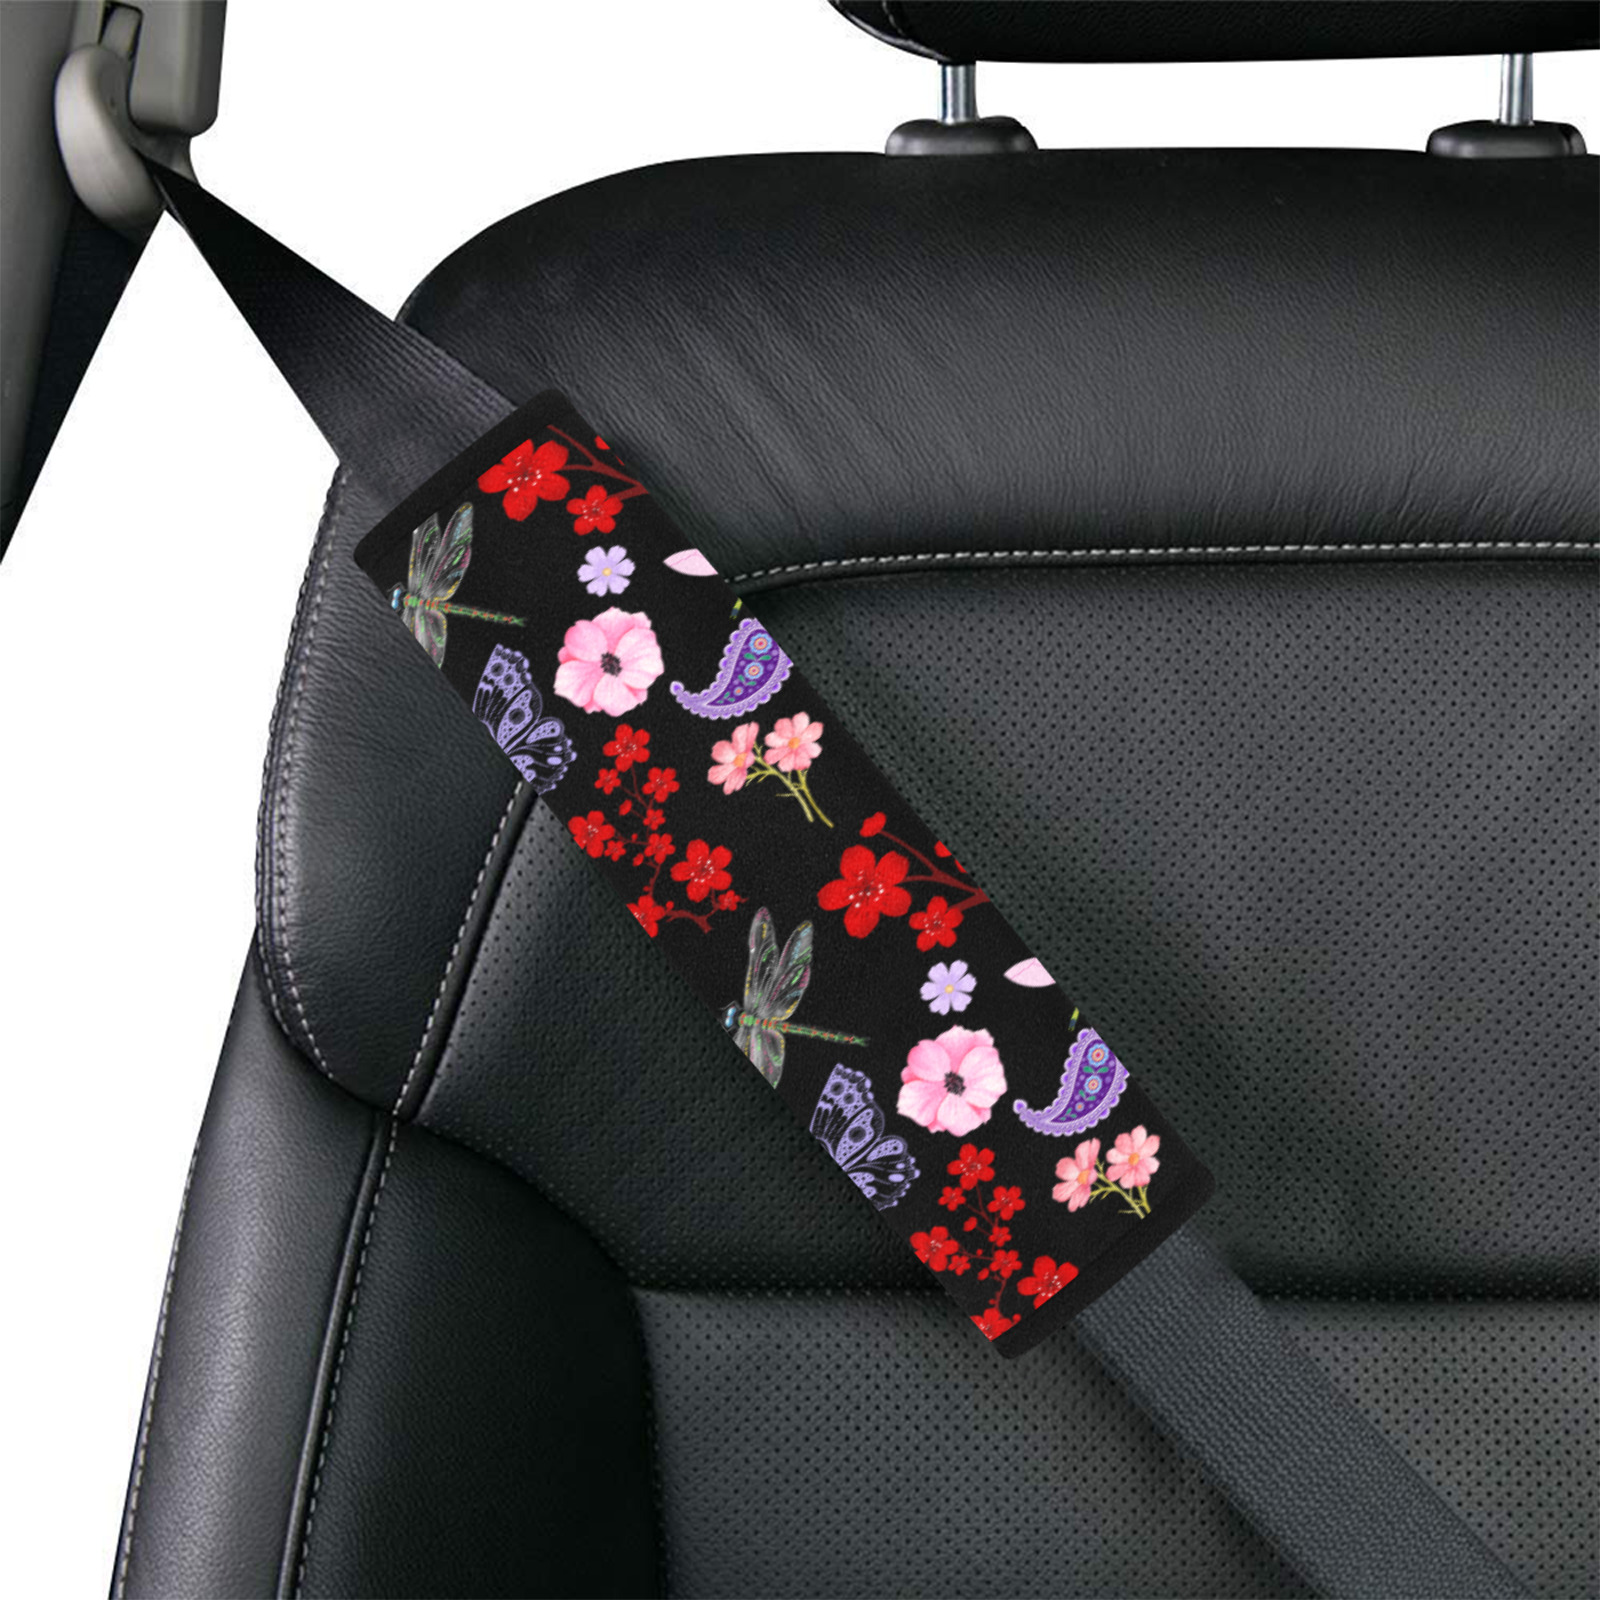 Black, Red, Pink, Purple, Dragonflies, Butterfly and Flowers Design Car Seat Belt Cover 7''x10'' (Pack of 2)